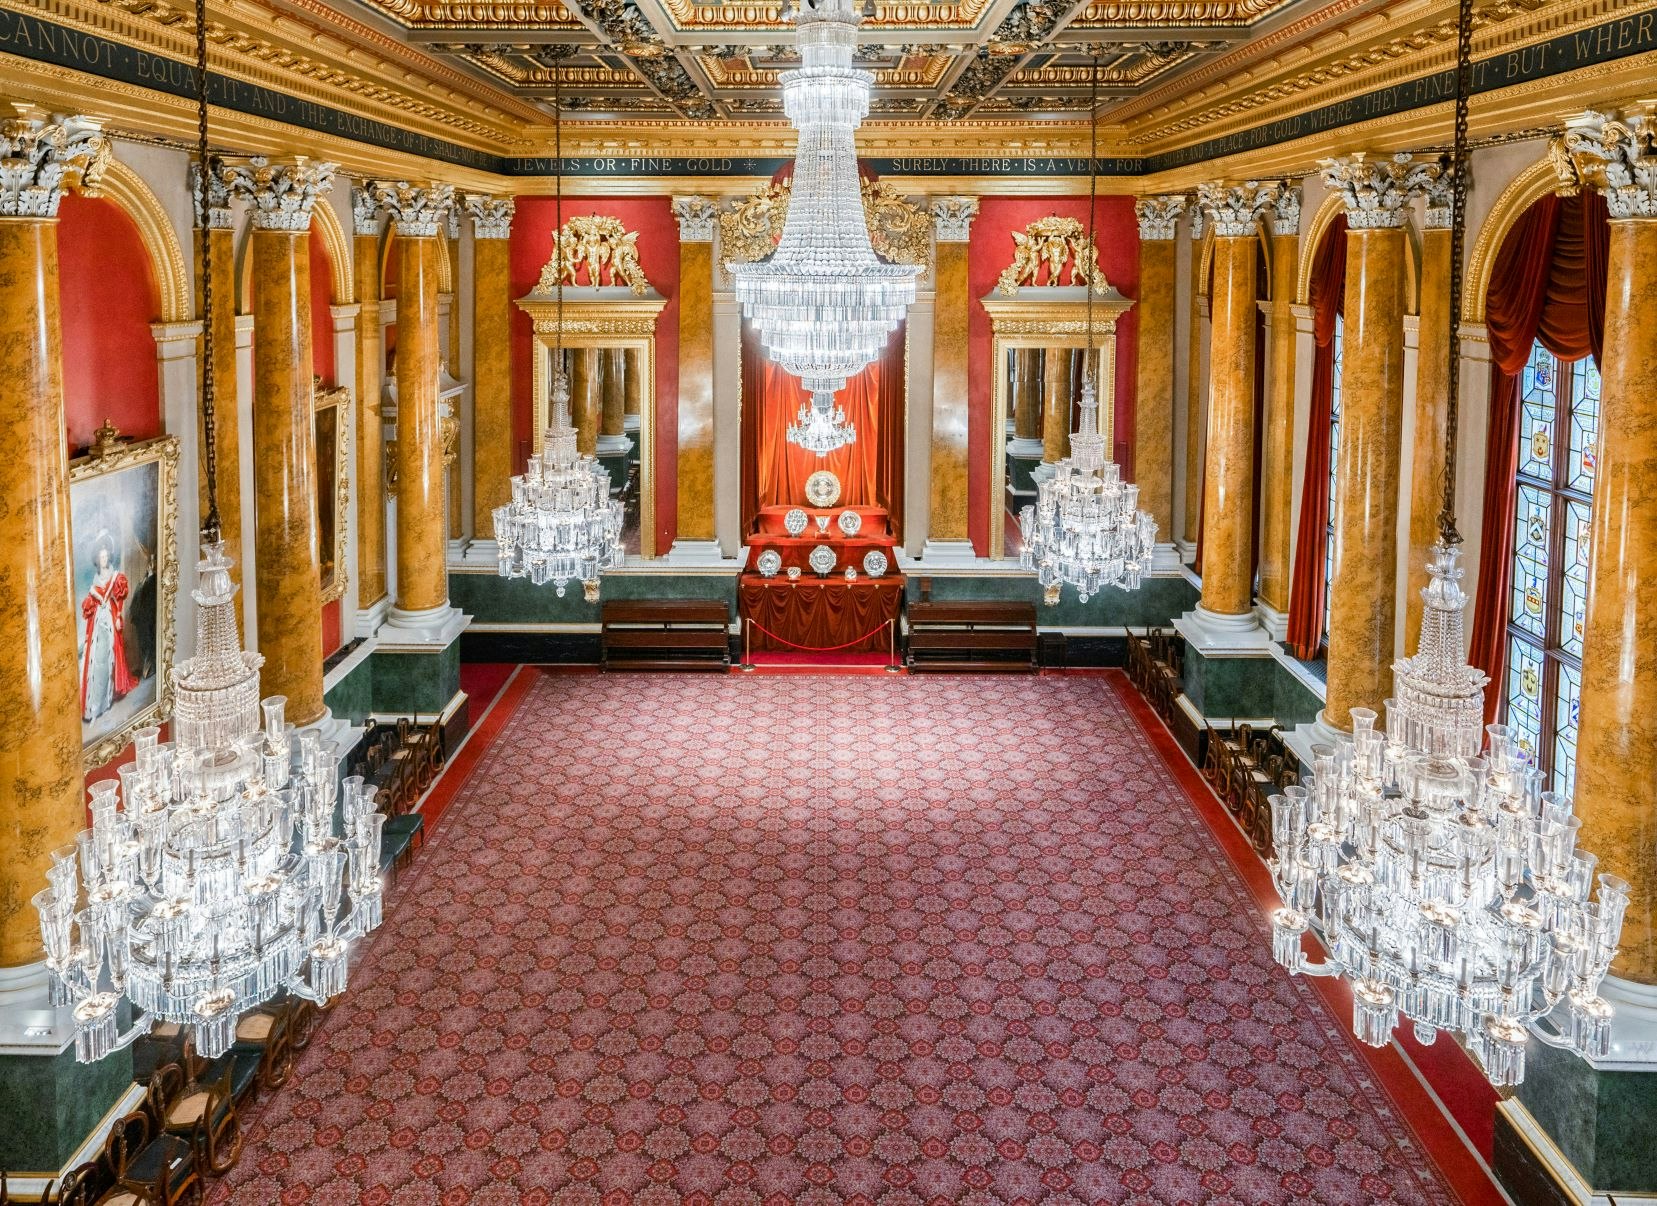 Livery Halls Venues in London - Goldsmiths' Hall